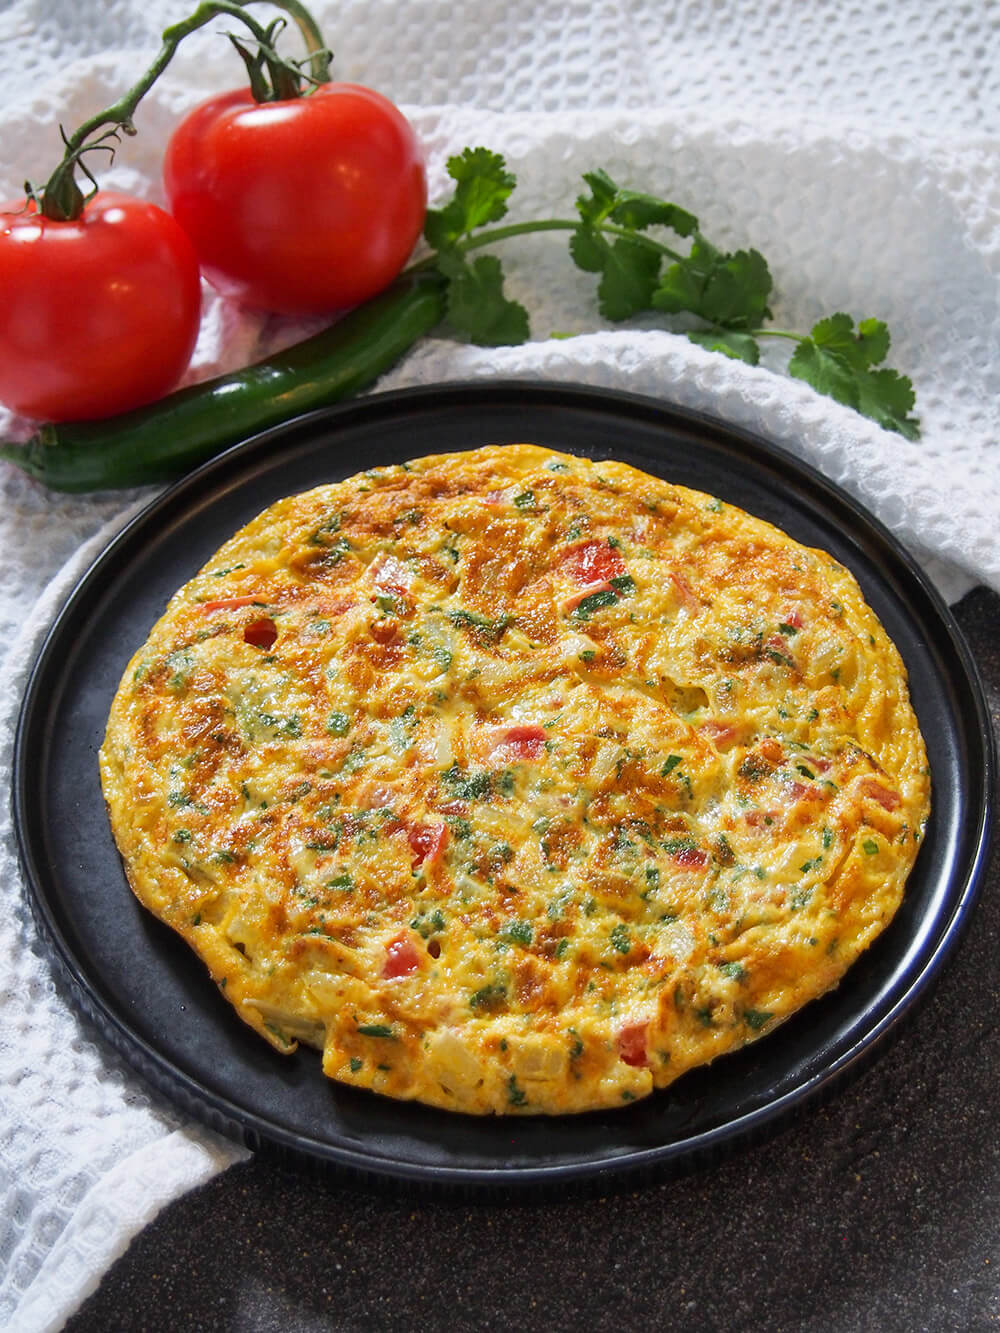 masala omelette on plate with tomato, chili and cilantro behind